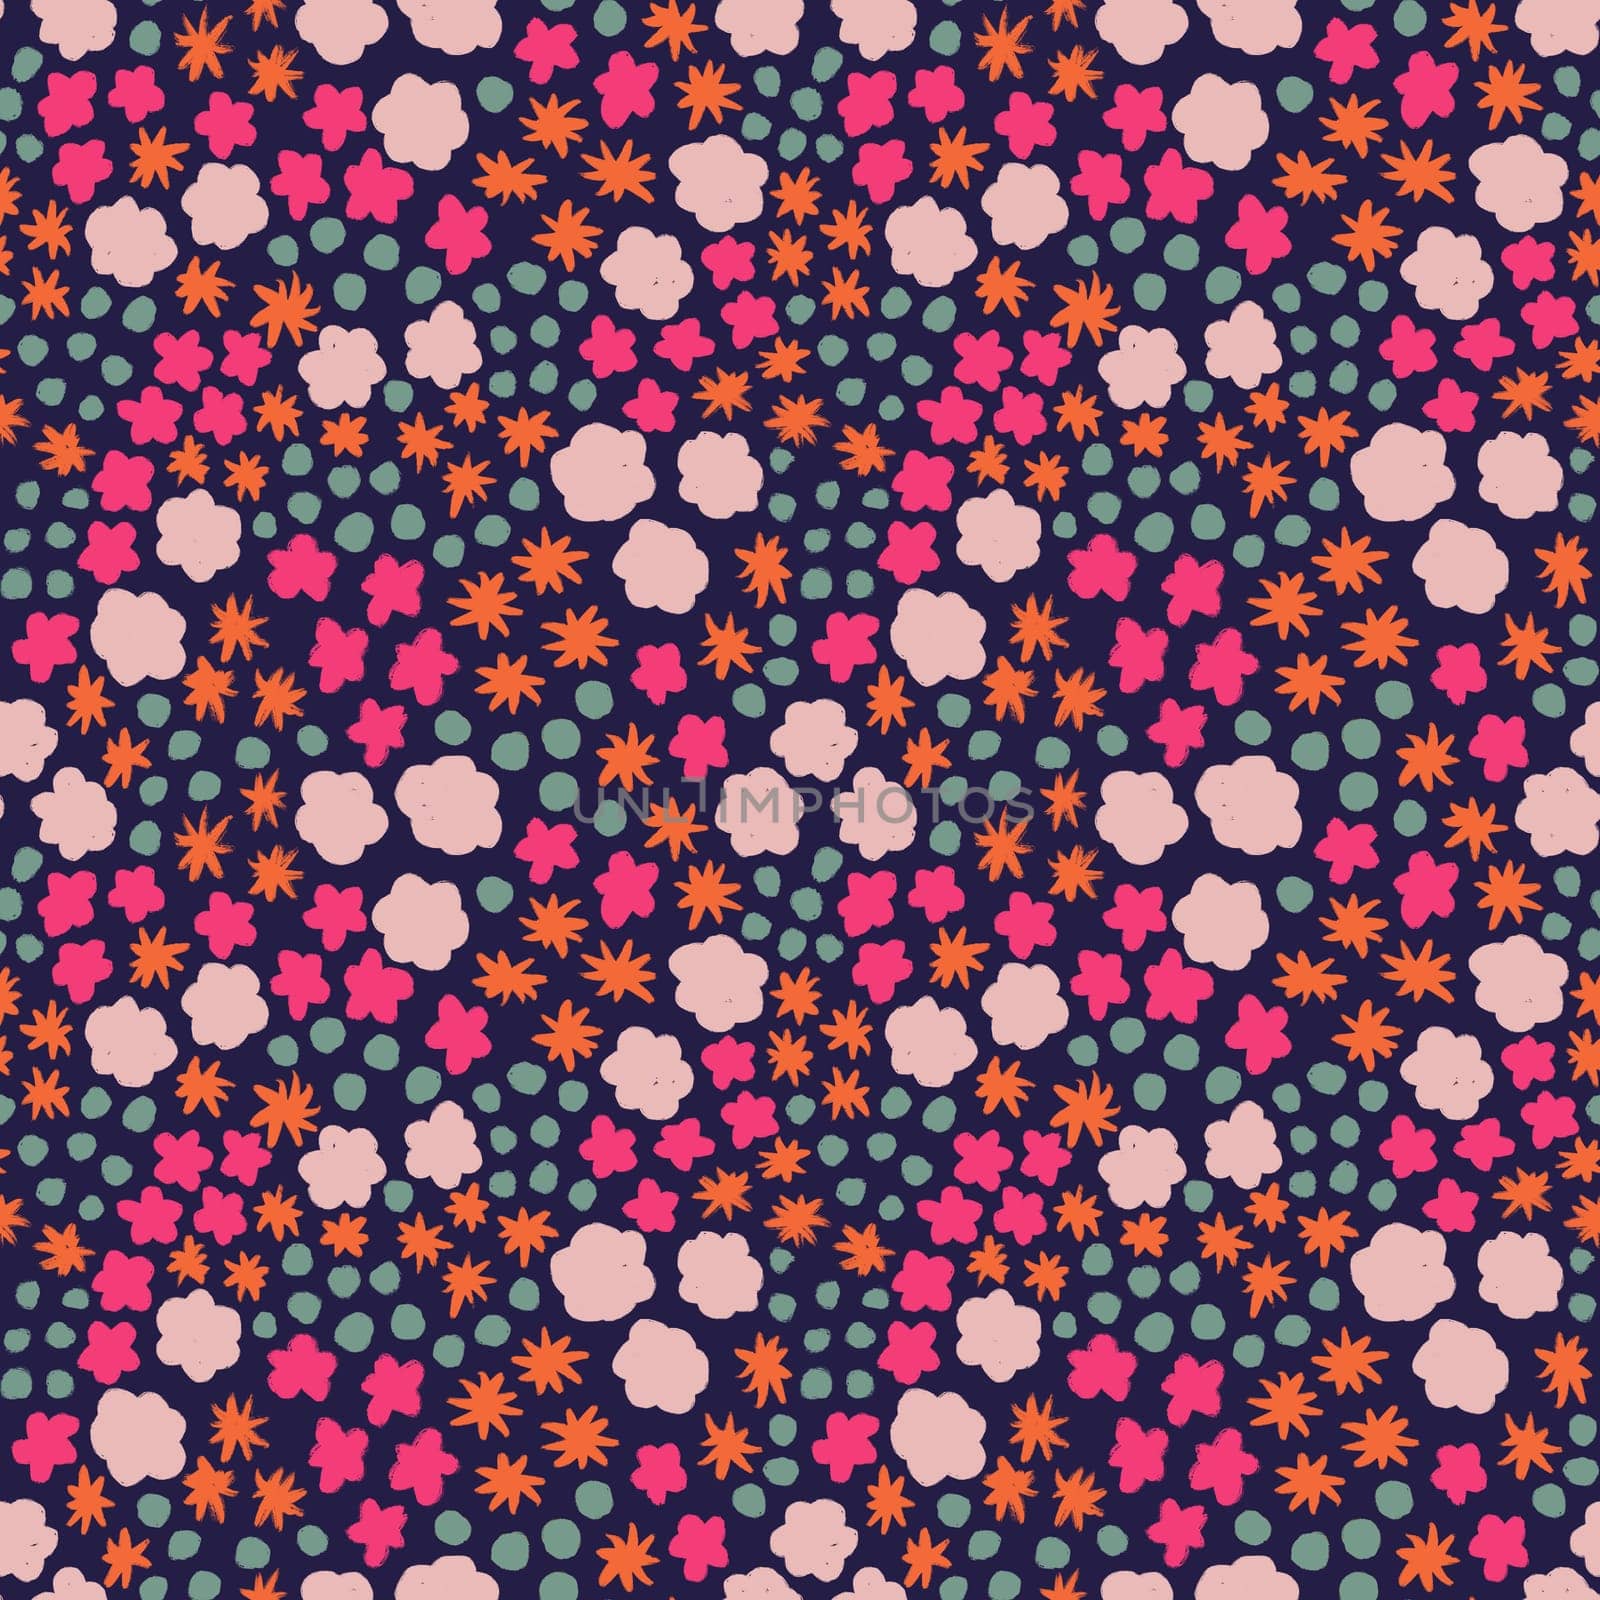 Hand drawn seamless pattern with pink turquoise flower floral elements, ditsy summer spring botanical nature print, bloom blossom stylized petals. Retro vintage fabric design, cute dots nature meadow